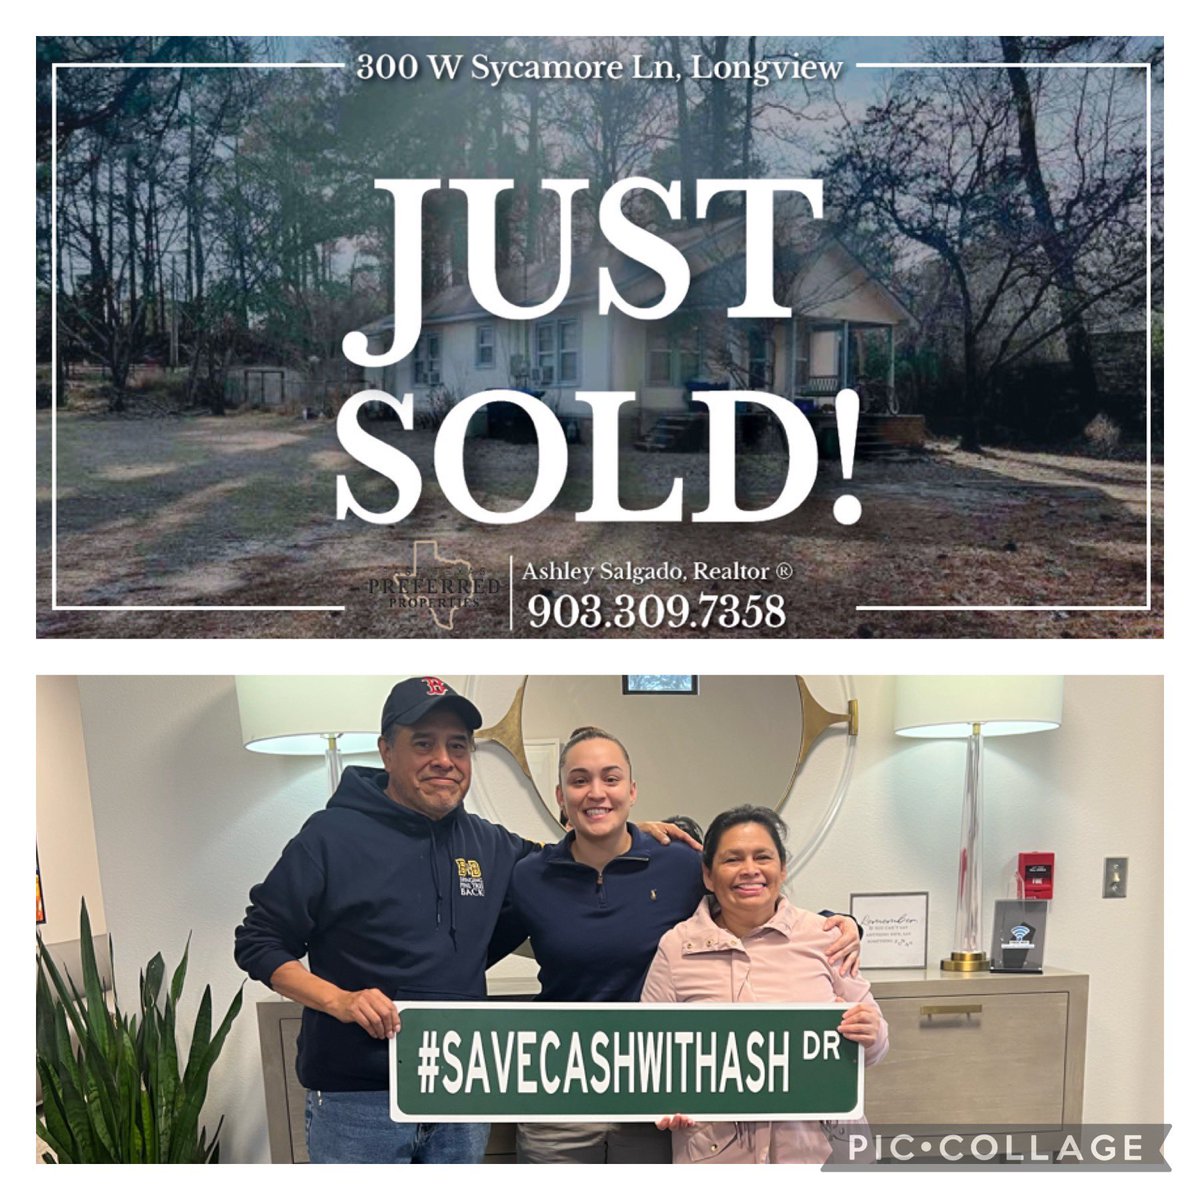 FELICIDADES 🎉🙏🏼

Been working with my sweet buyers for several months now! Excited they are finally done! 

9️⃣0️⃣3️⃣.3️⃣0️⃣9️⃣.7️⃣3️⃣5️⃣8️⃣

#EastTexasRealEstate #MarineRealtor #AshleySalgadoTheRealtor #VeteranRealtor #EastTexasRealtor #ListedBySalgado #SAVECASHWITHASH #LongviewTexas